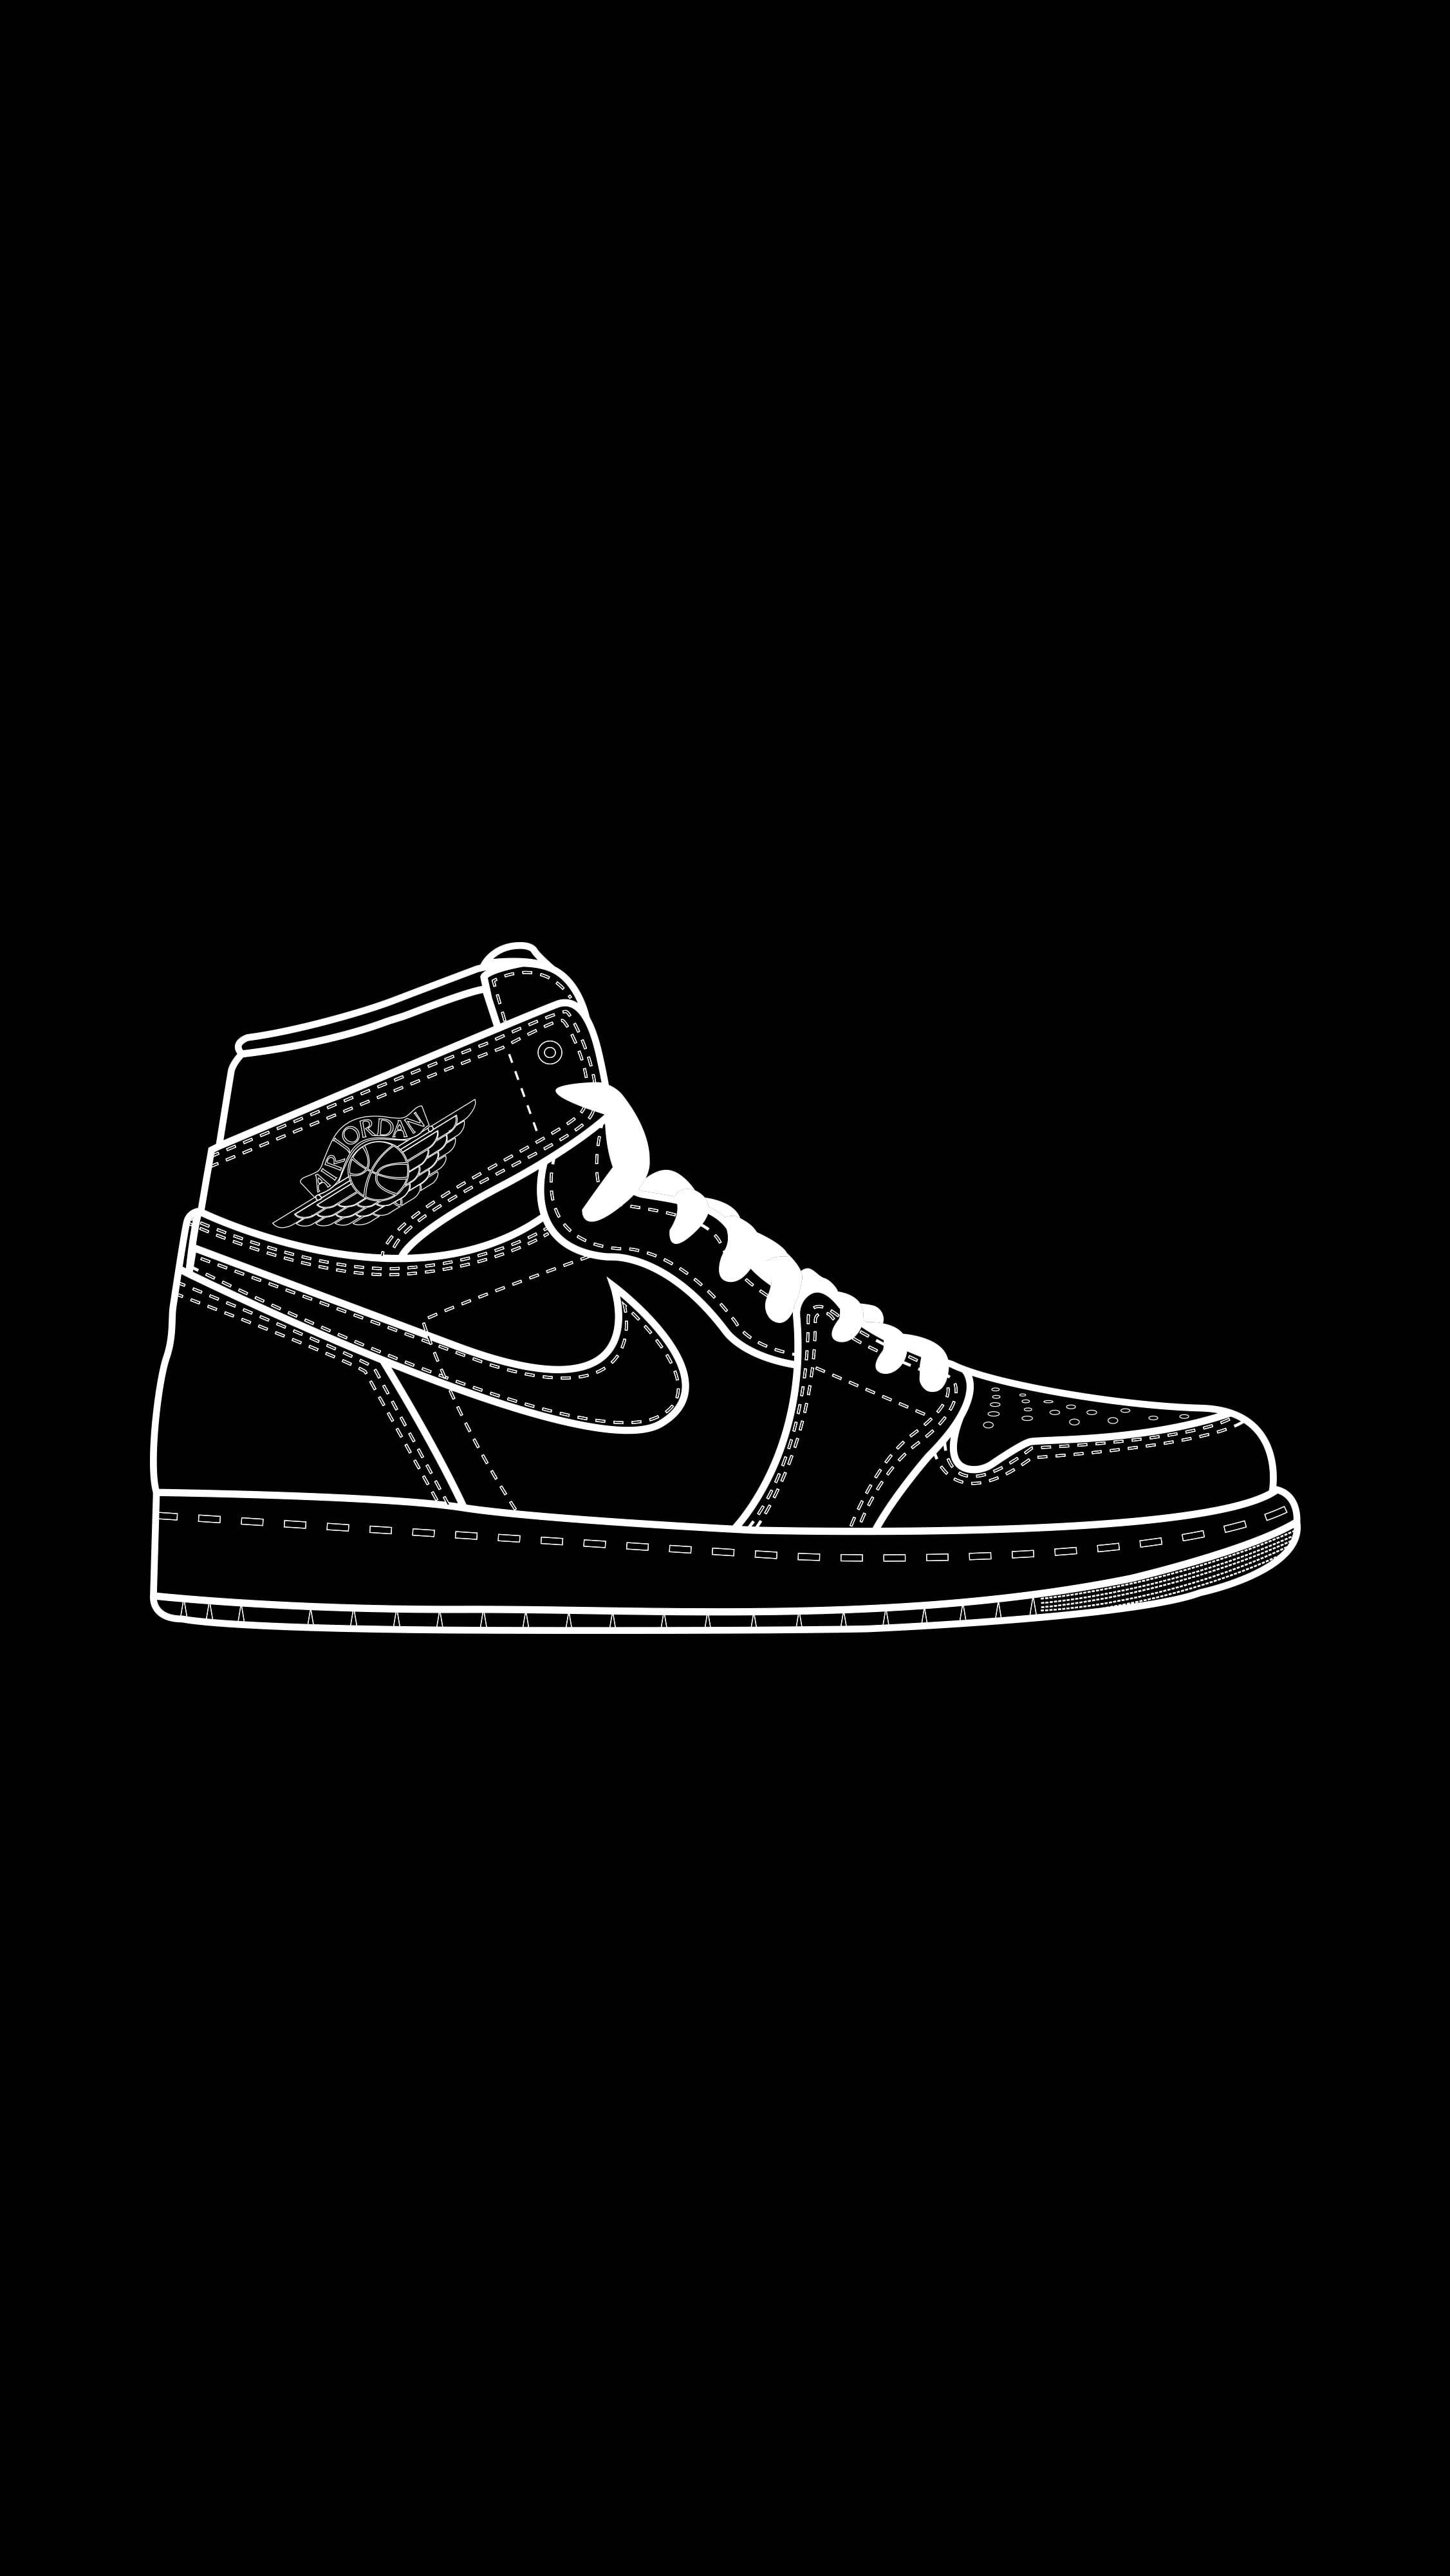 Download White Outline Cartoon Nike Shoes Wallpaper 